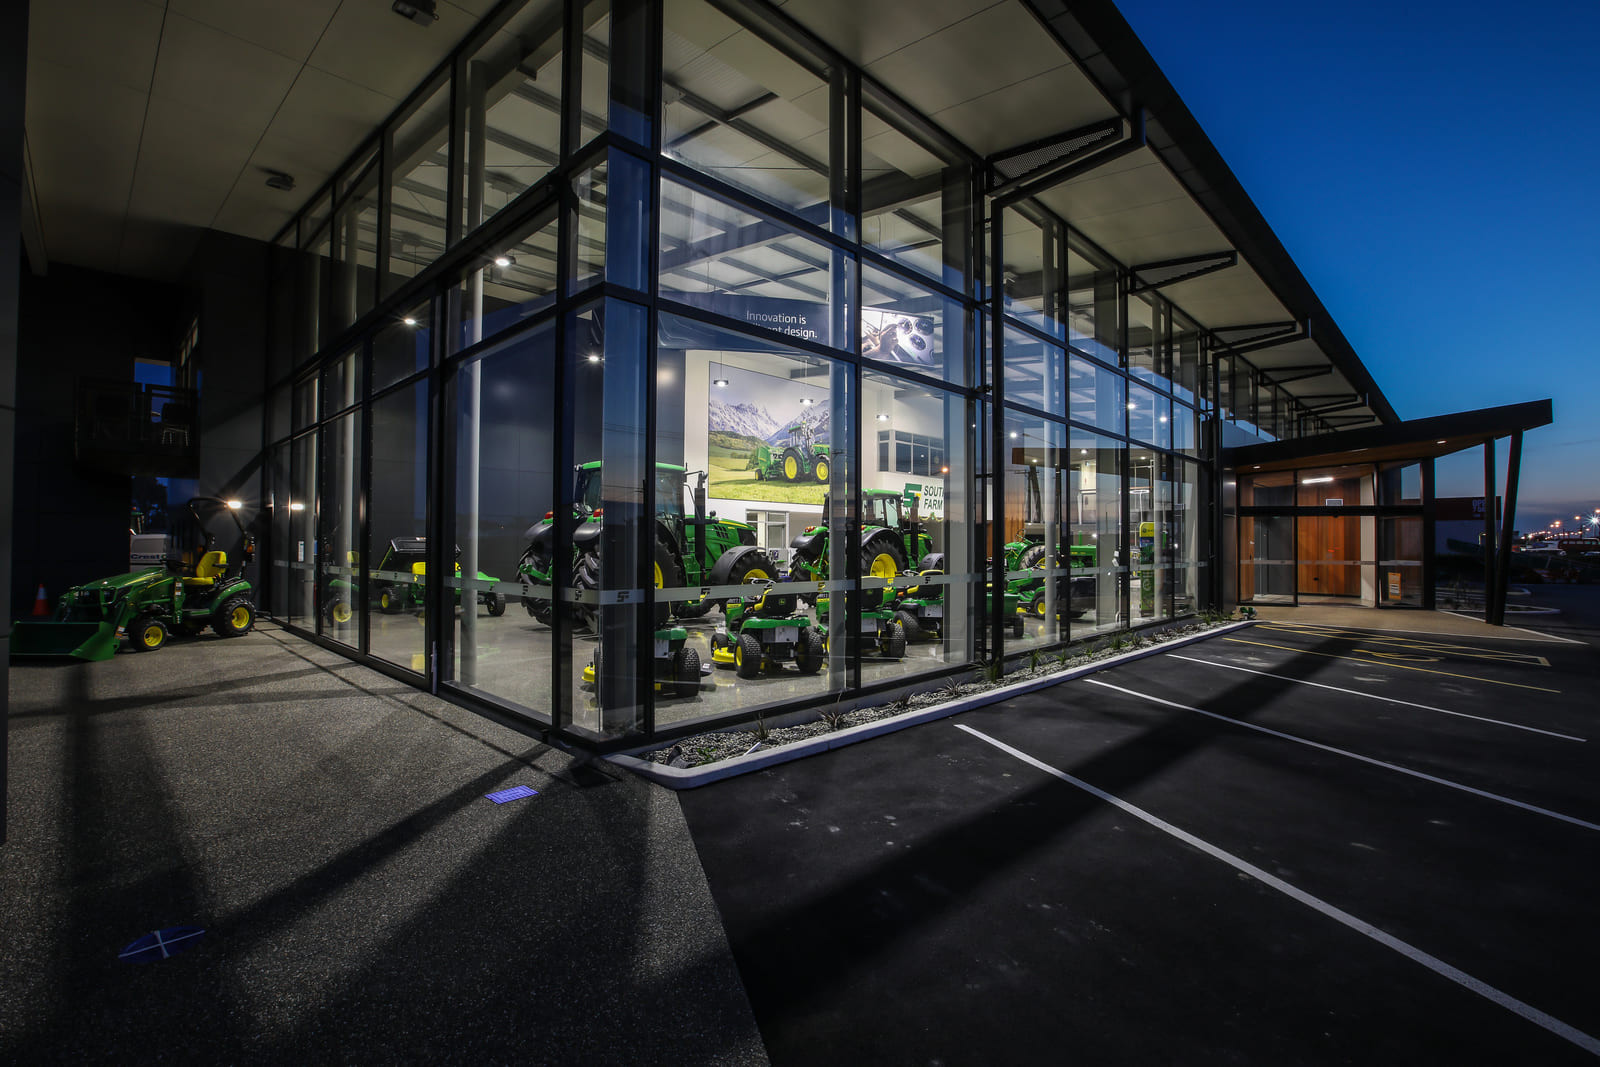 Brightly lit space with large windows featuring tractors